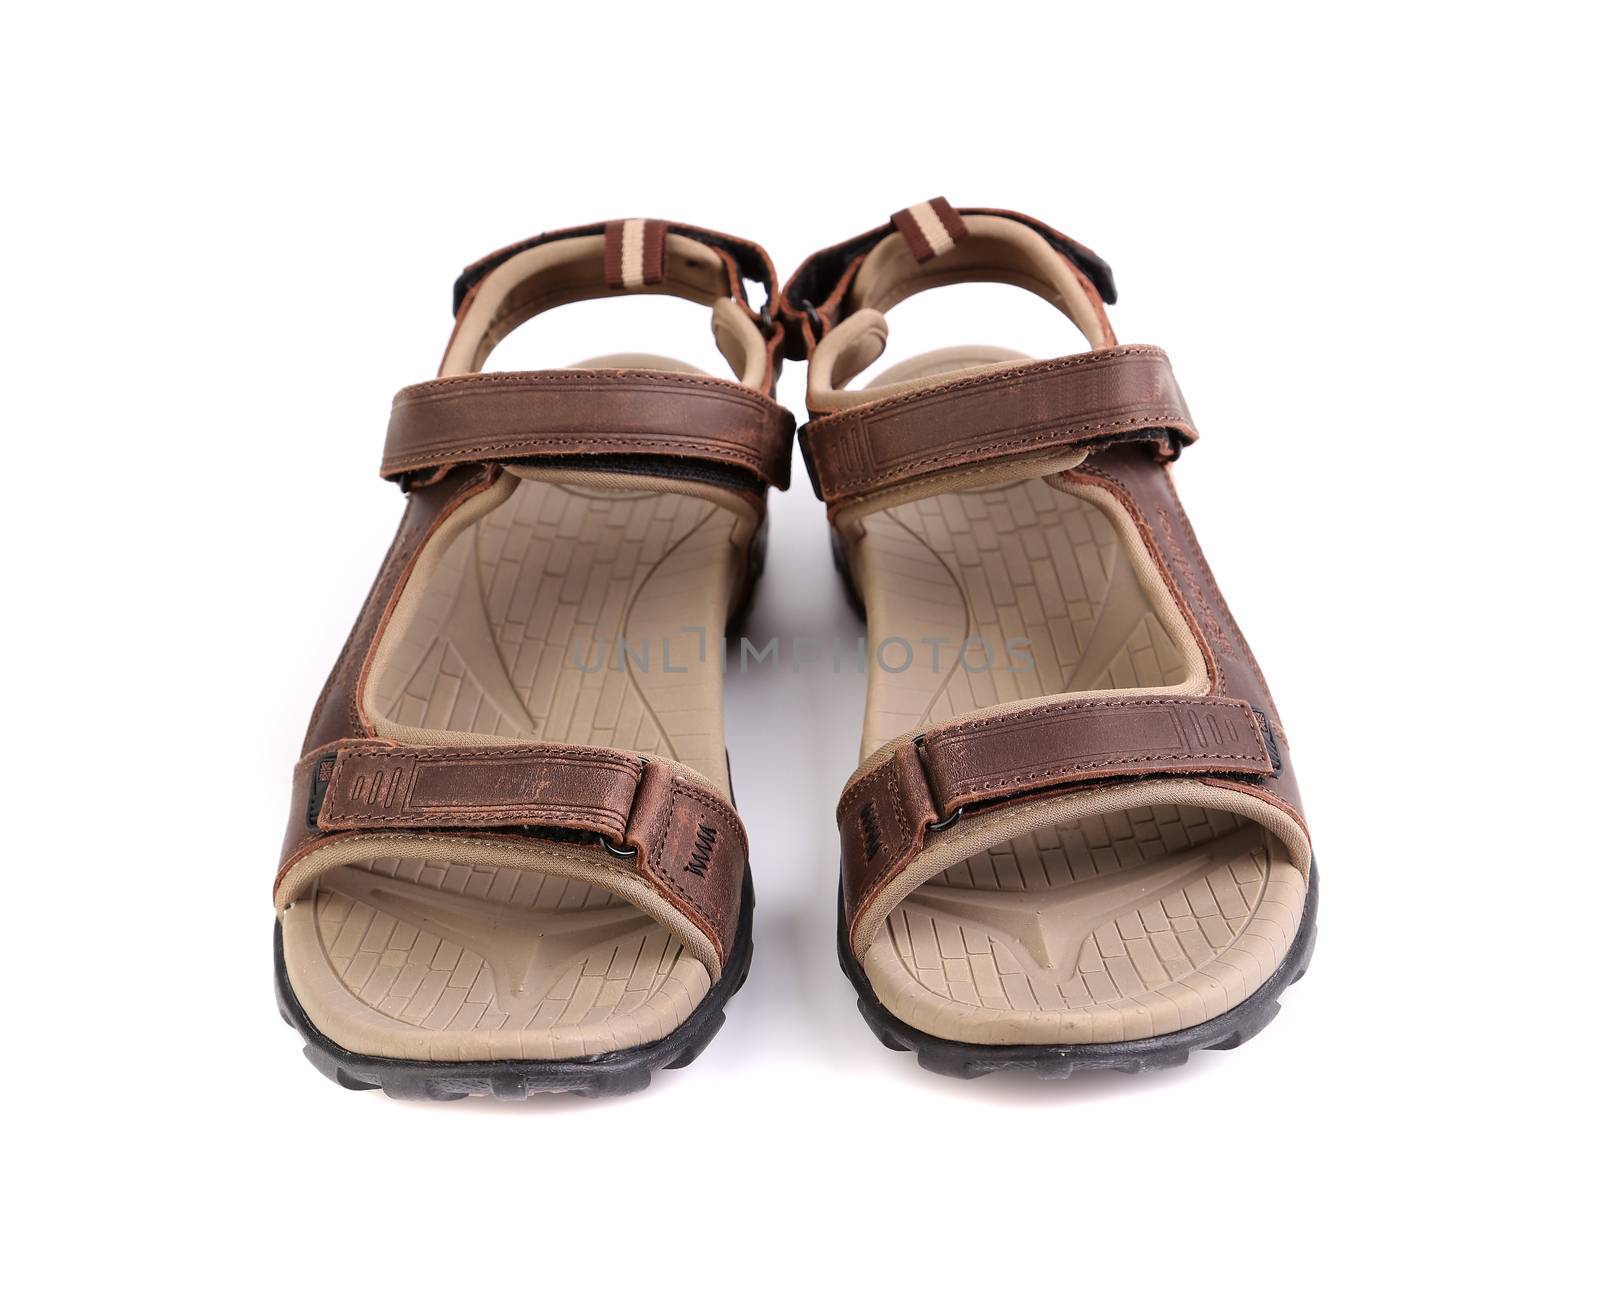 A sport brown sandals by indigolotos